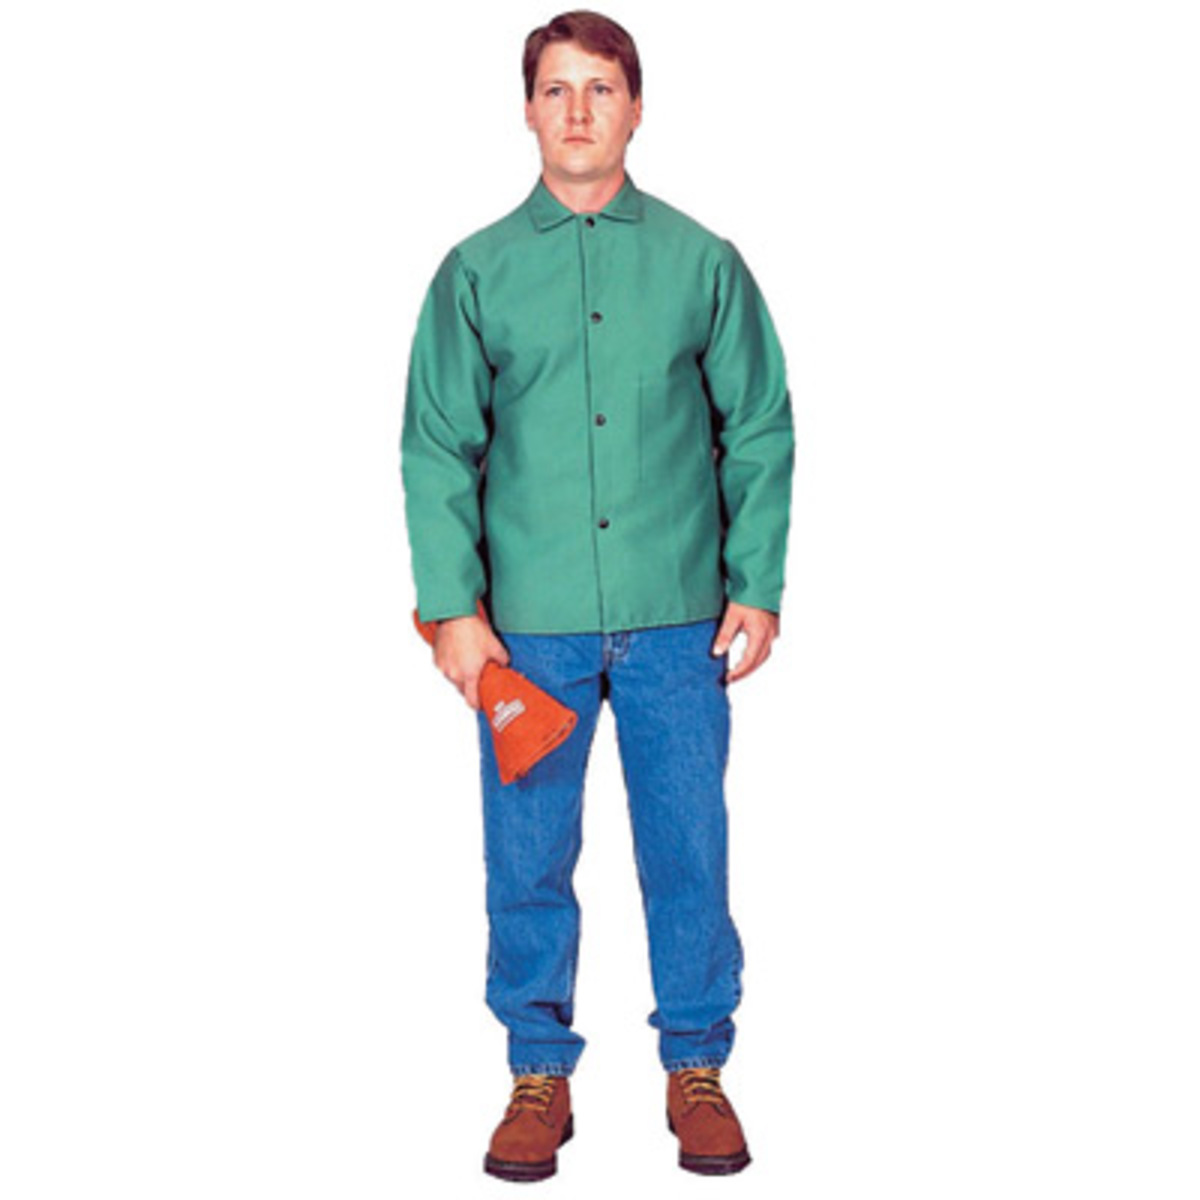 Stanco Safety Products™ 2X Tall Green Cotton Flame Resistant Welding Jacket With Snap Closure